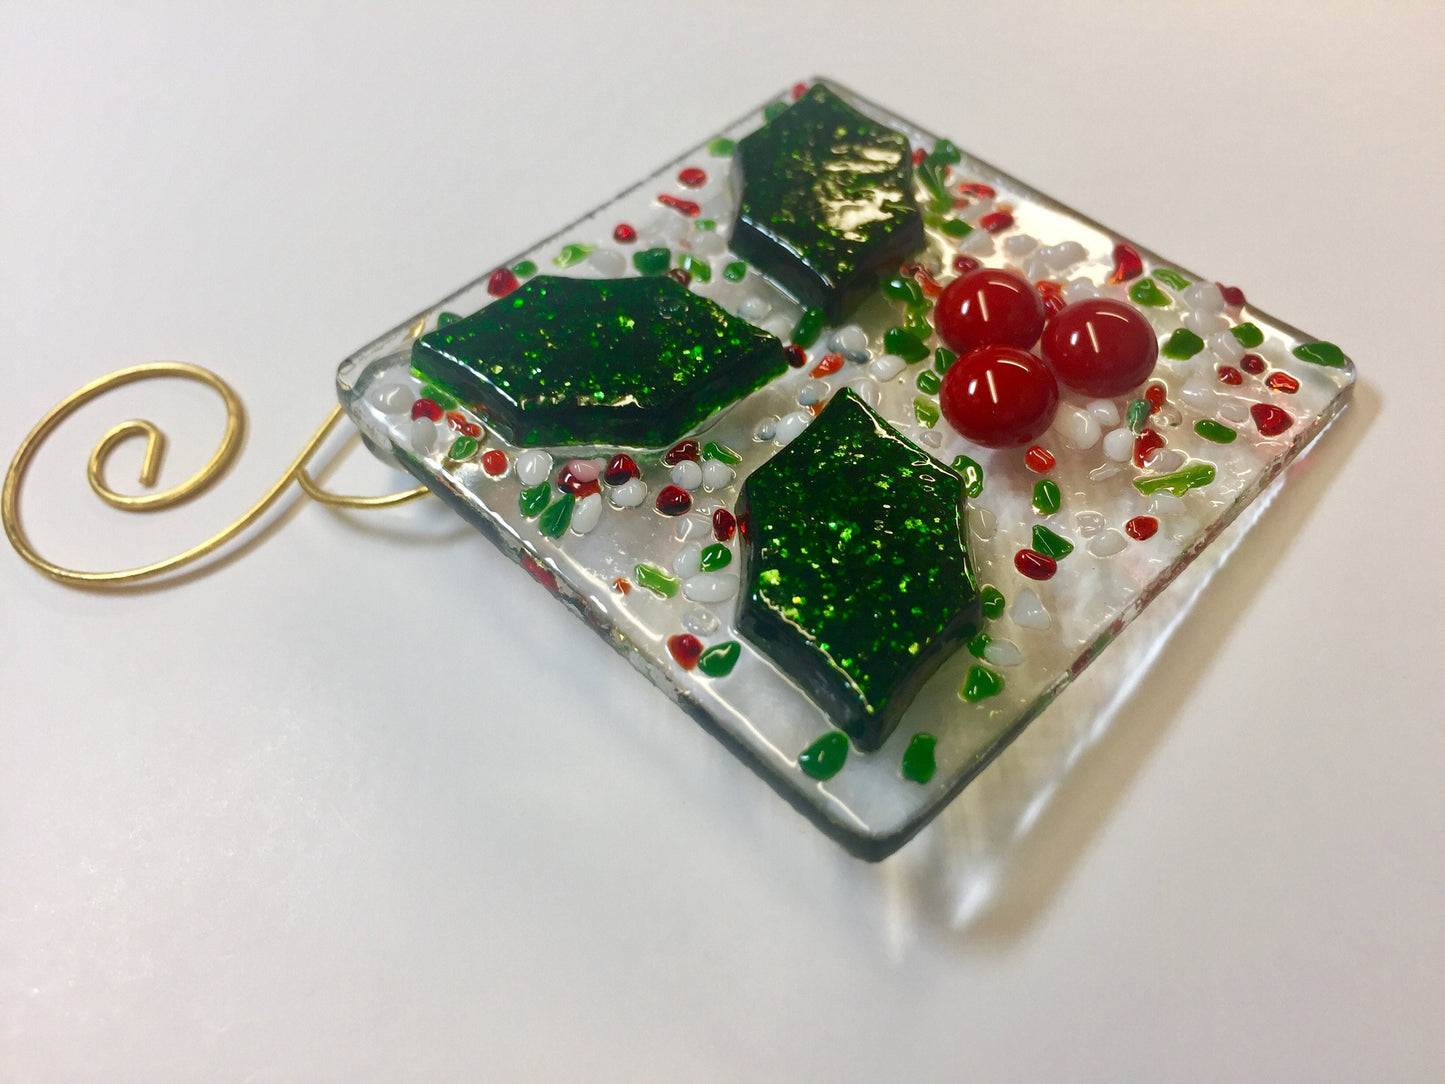 Holly & Berries Fused Glass Christmas Colors Ornament